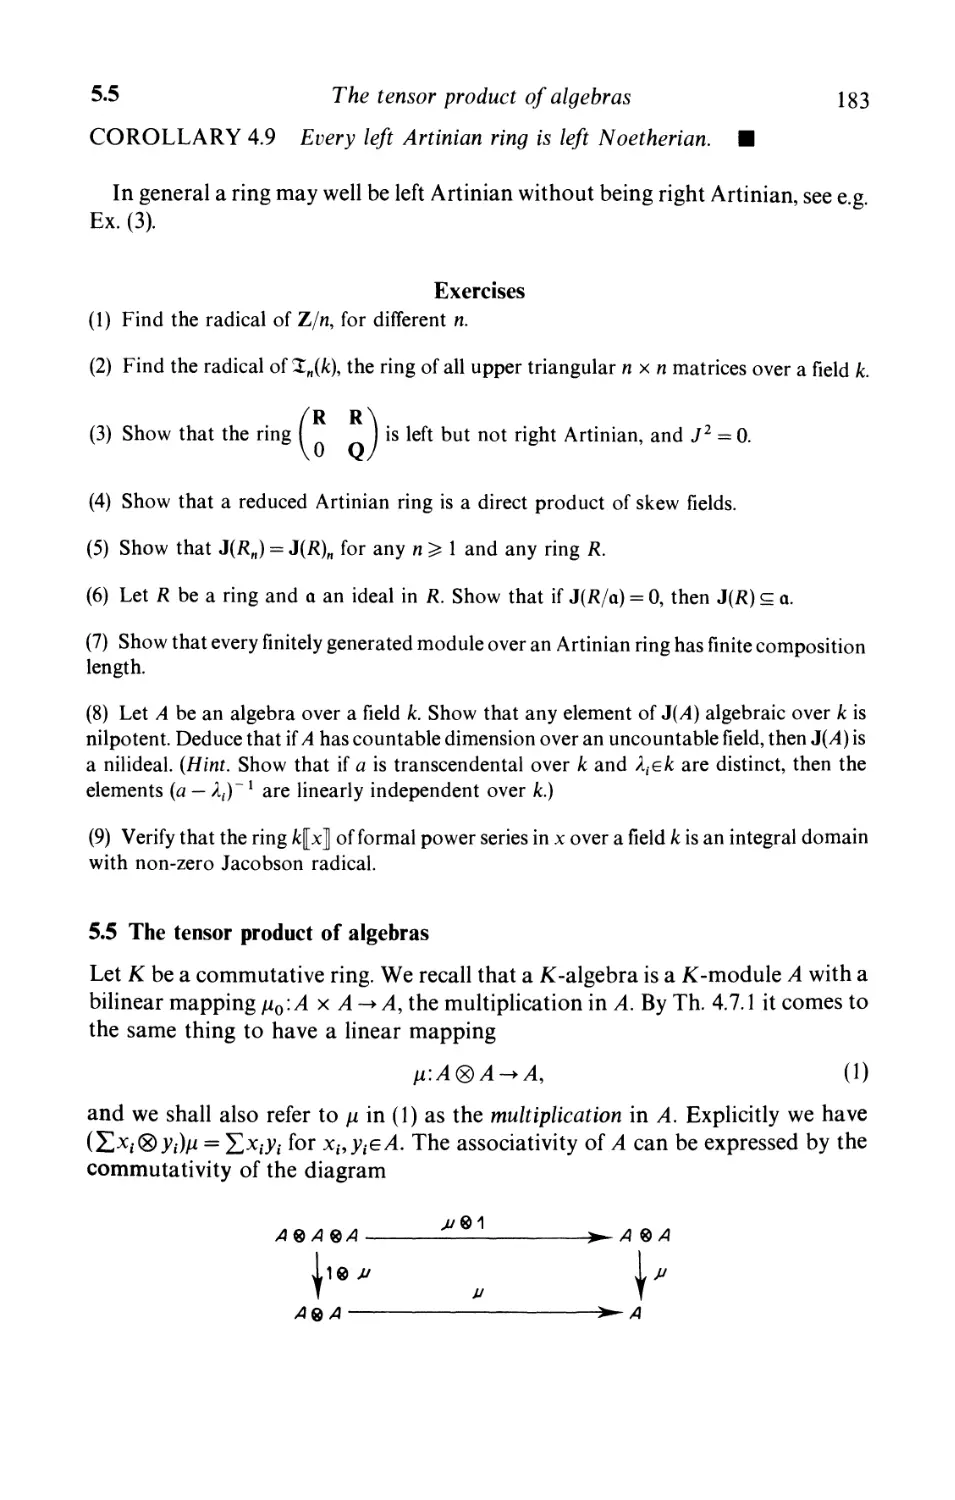 5.5 The tensor product of algebras